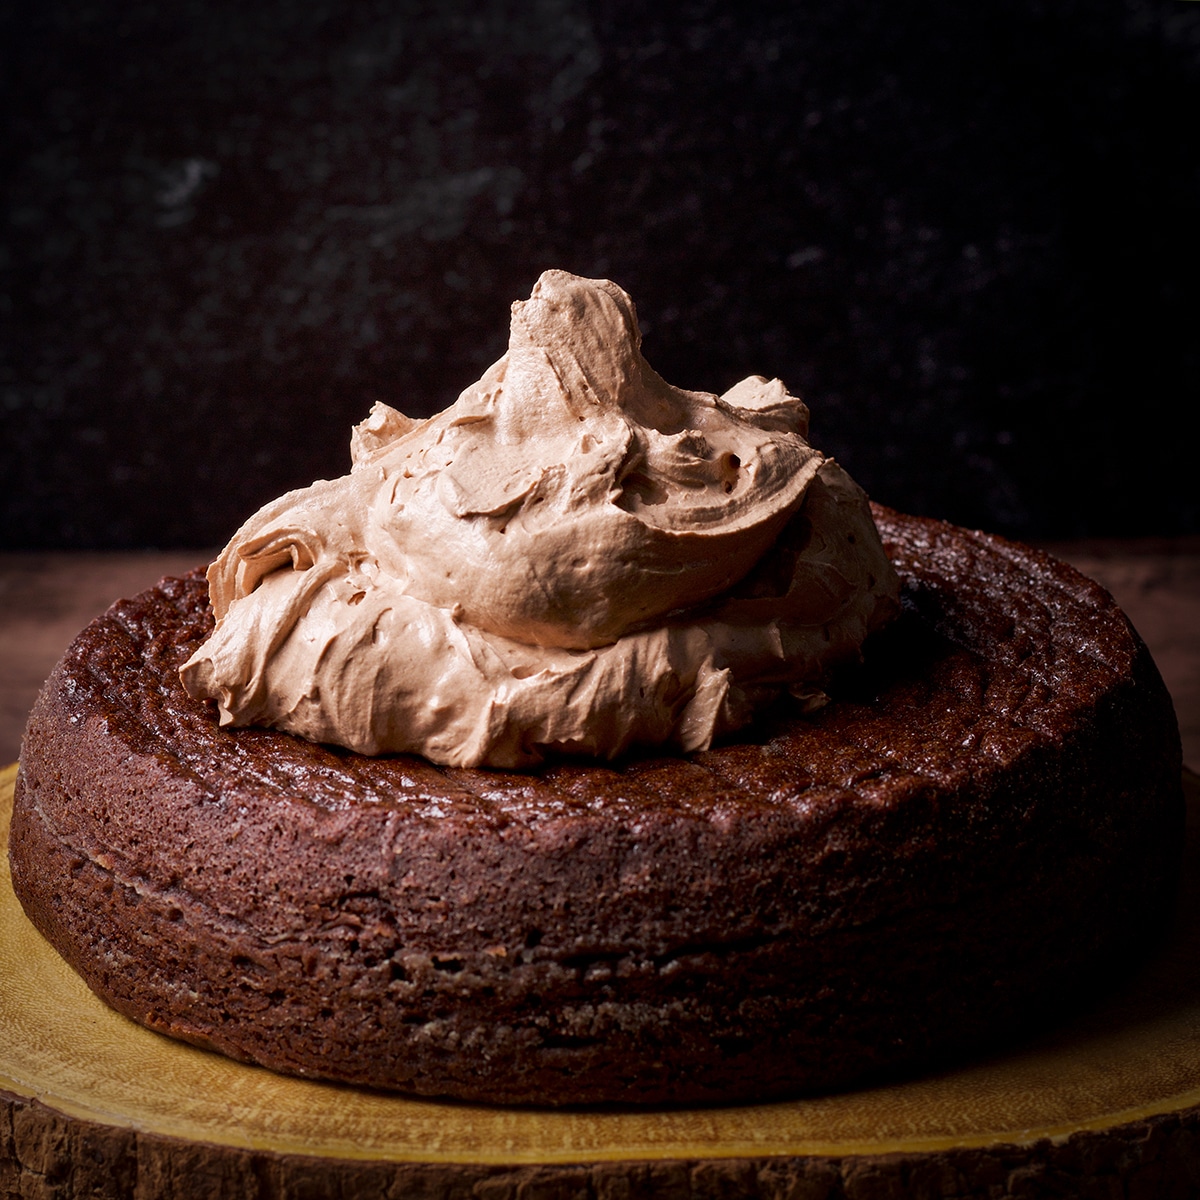 A large scoop of milk chocolate buttercream in the center of a round dark chocolate cake layer.